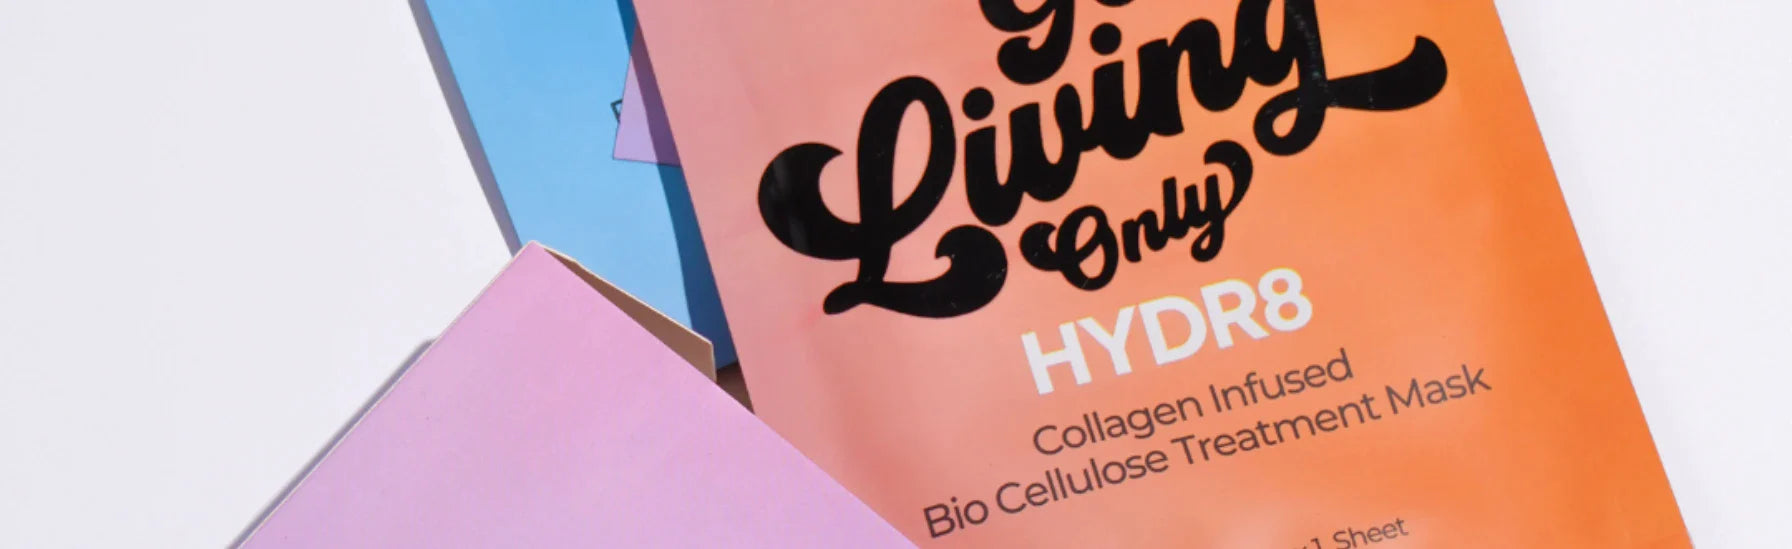 Hydrate and rejuvenate with Good Living Only's HYDR8 Collagen Infused Bio Cellulose Treatment Mask, available at Vams Beauty Shop - top choice for premium Australian skincare.